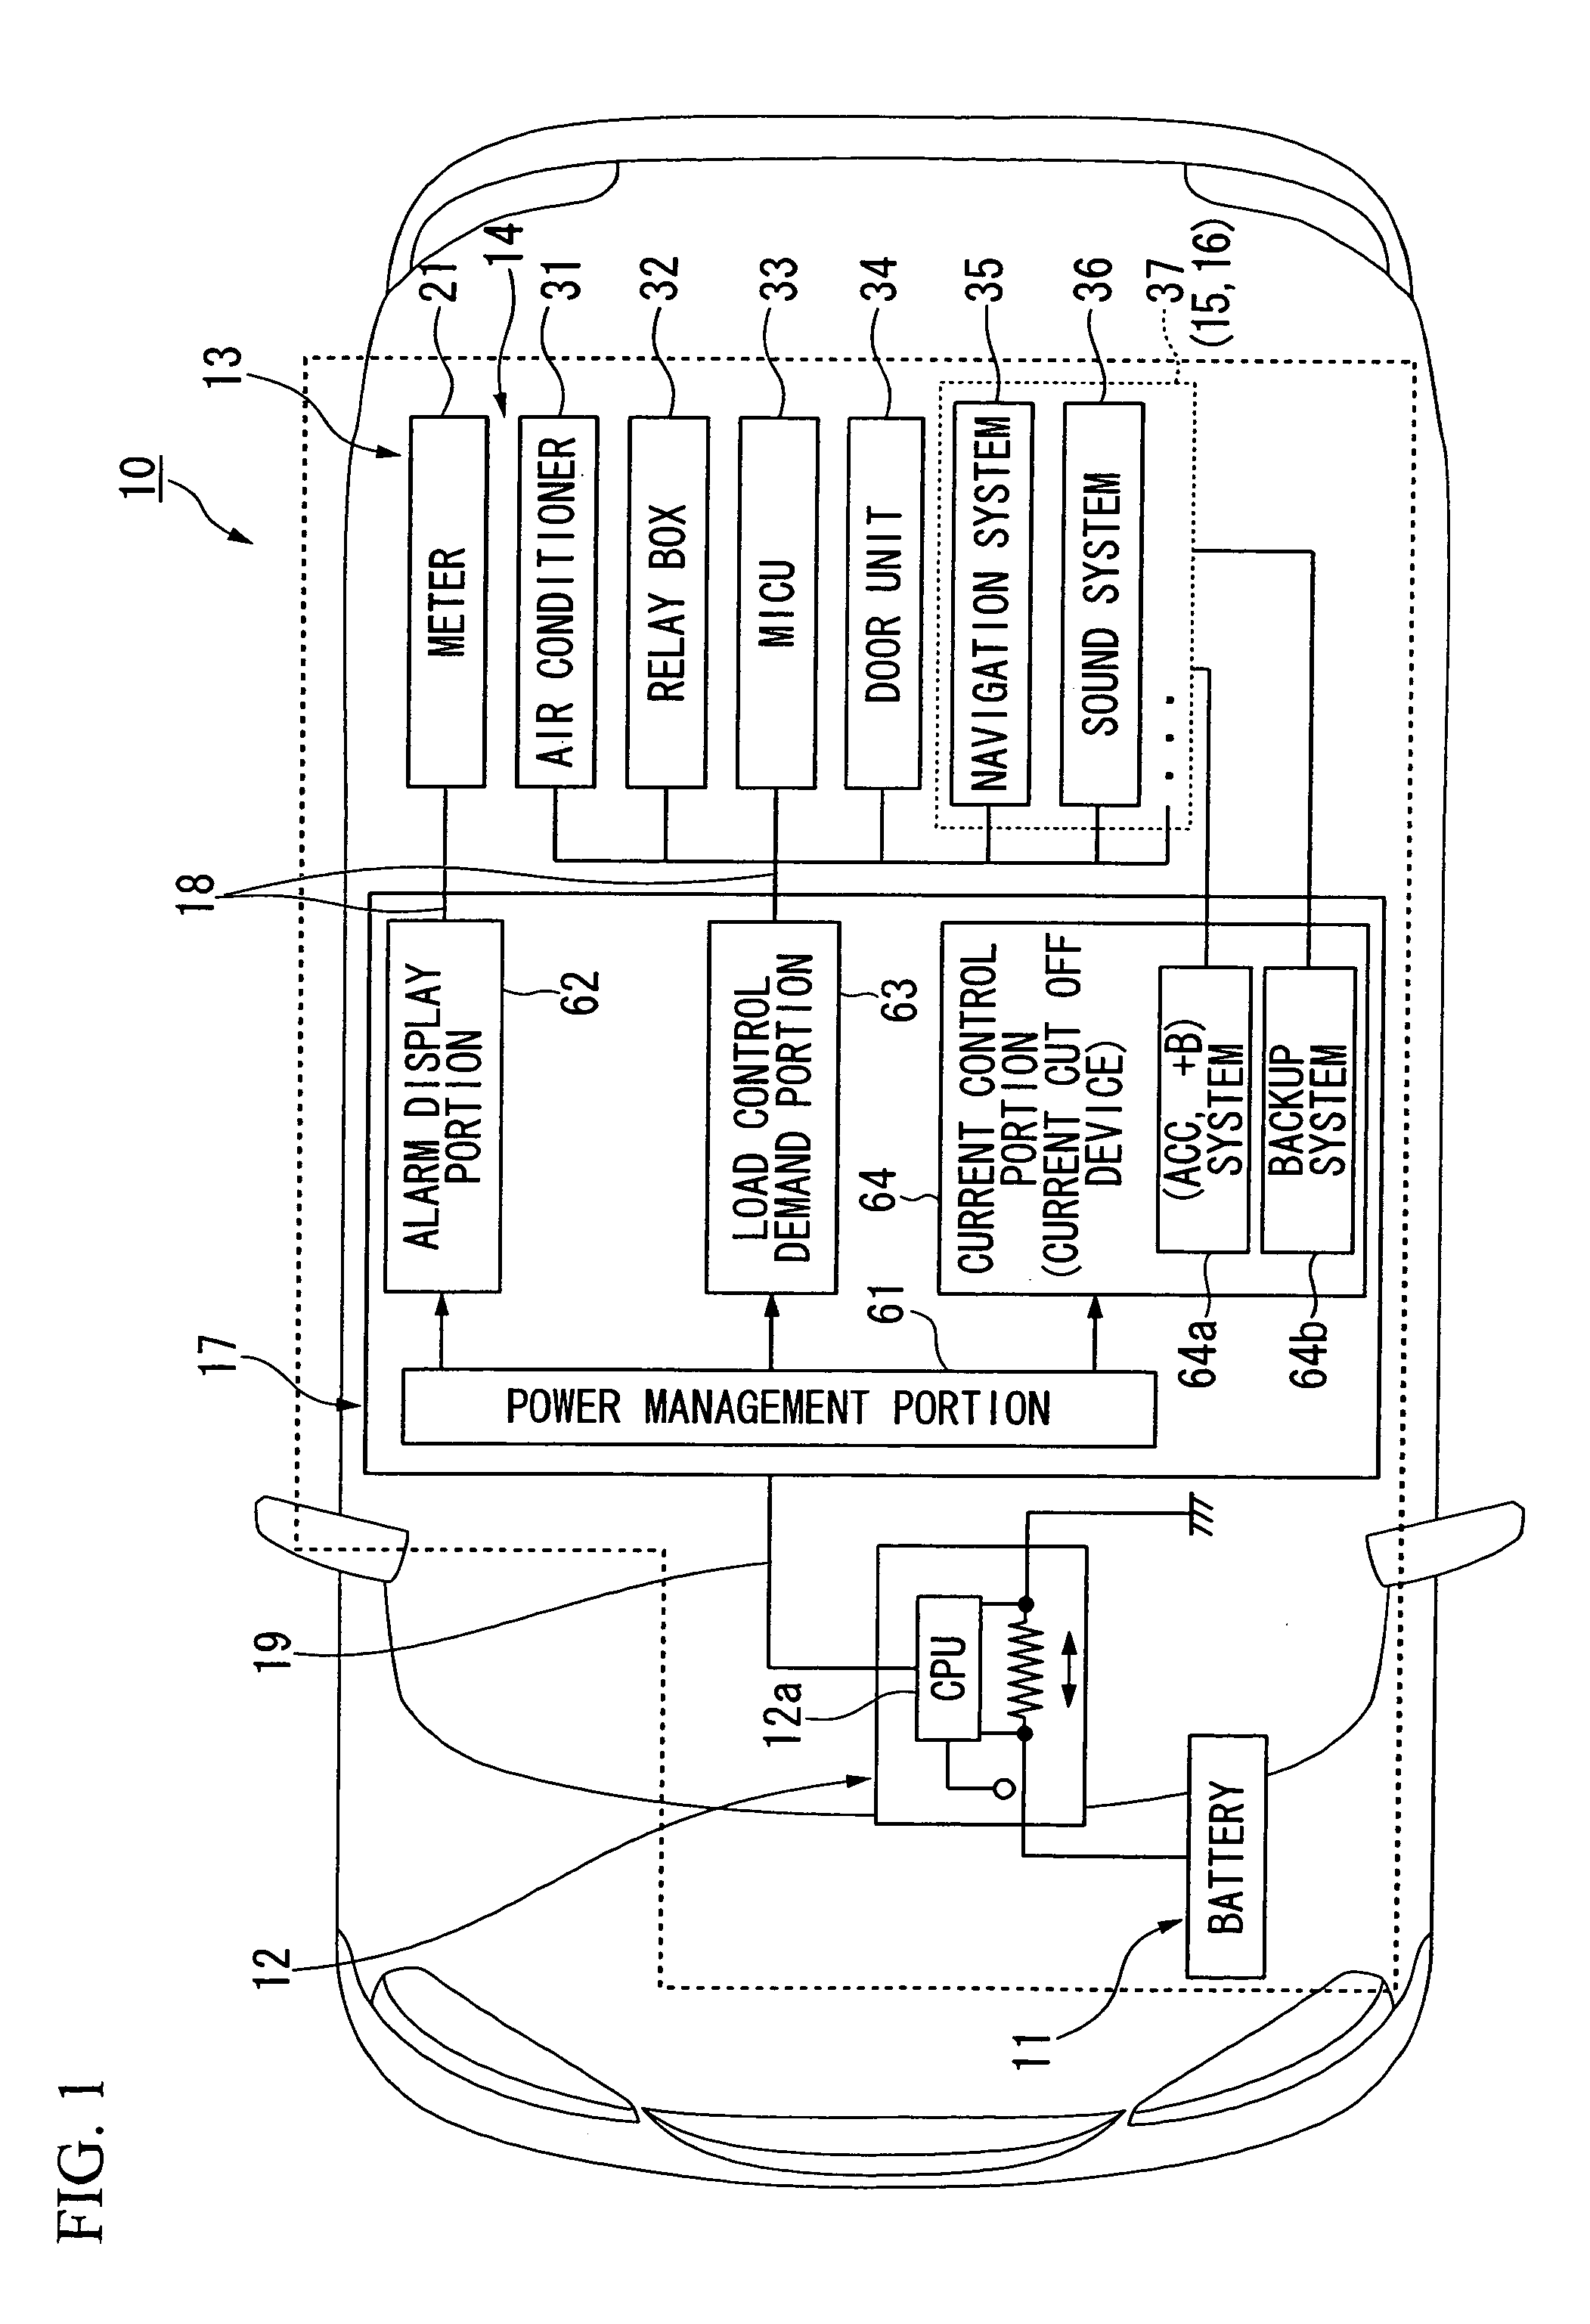 Vehicle load control device